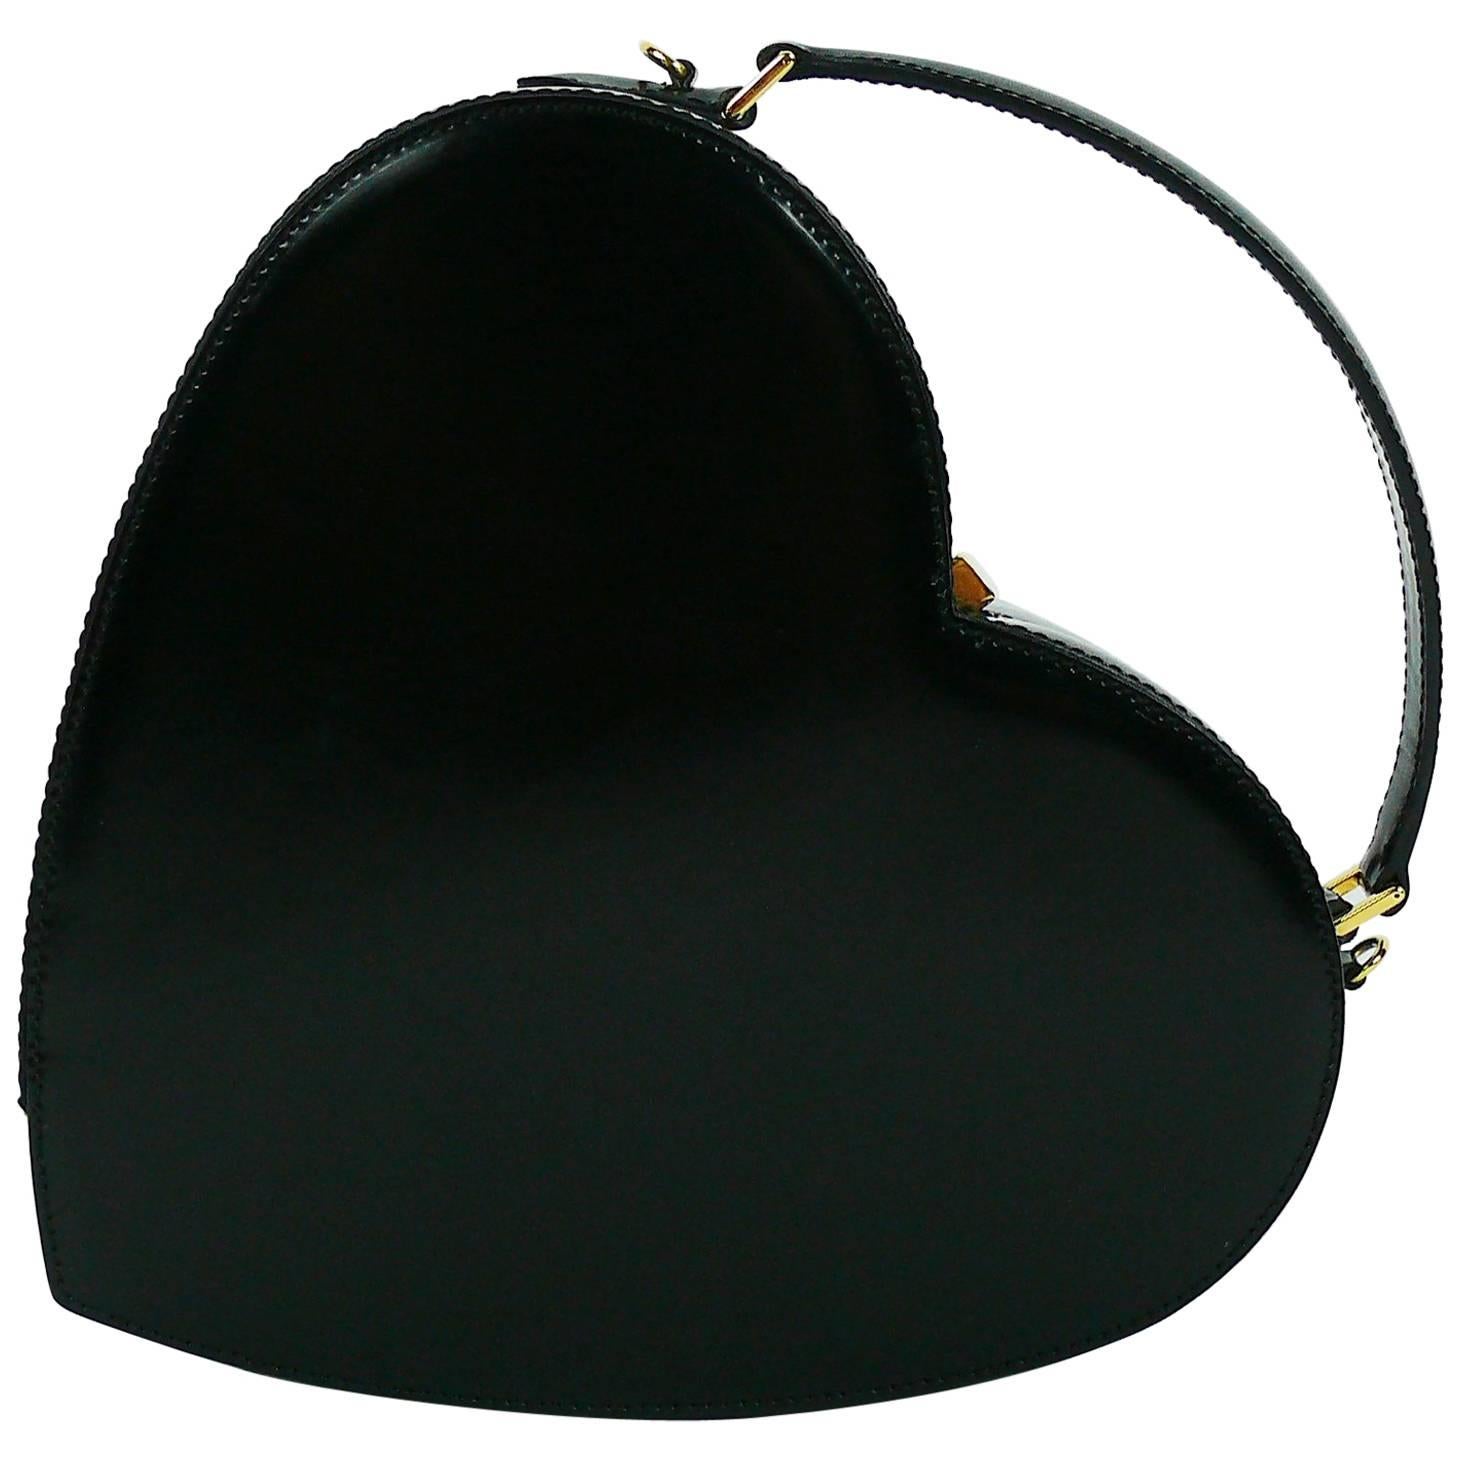 Moschino Vintage Rare Black Leather Heart Bag The Nanny For Sale at 1stDibs   moschino heart bag the nanny, fran fine heart purse, moschino heart bag  vintage the nanny